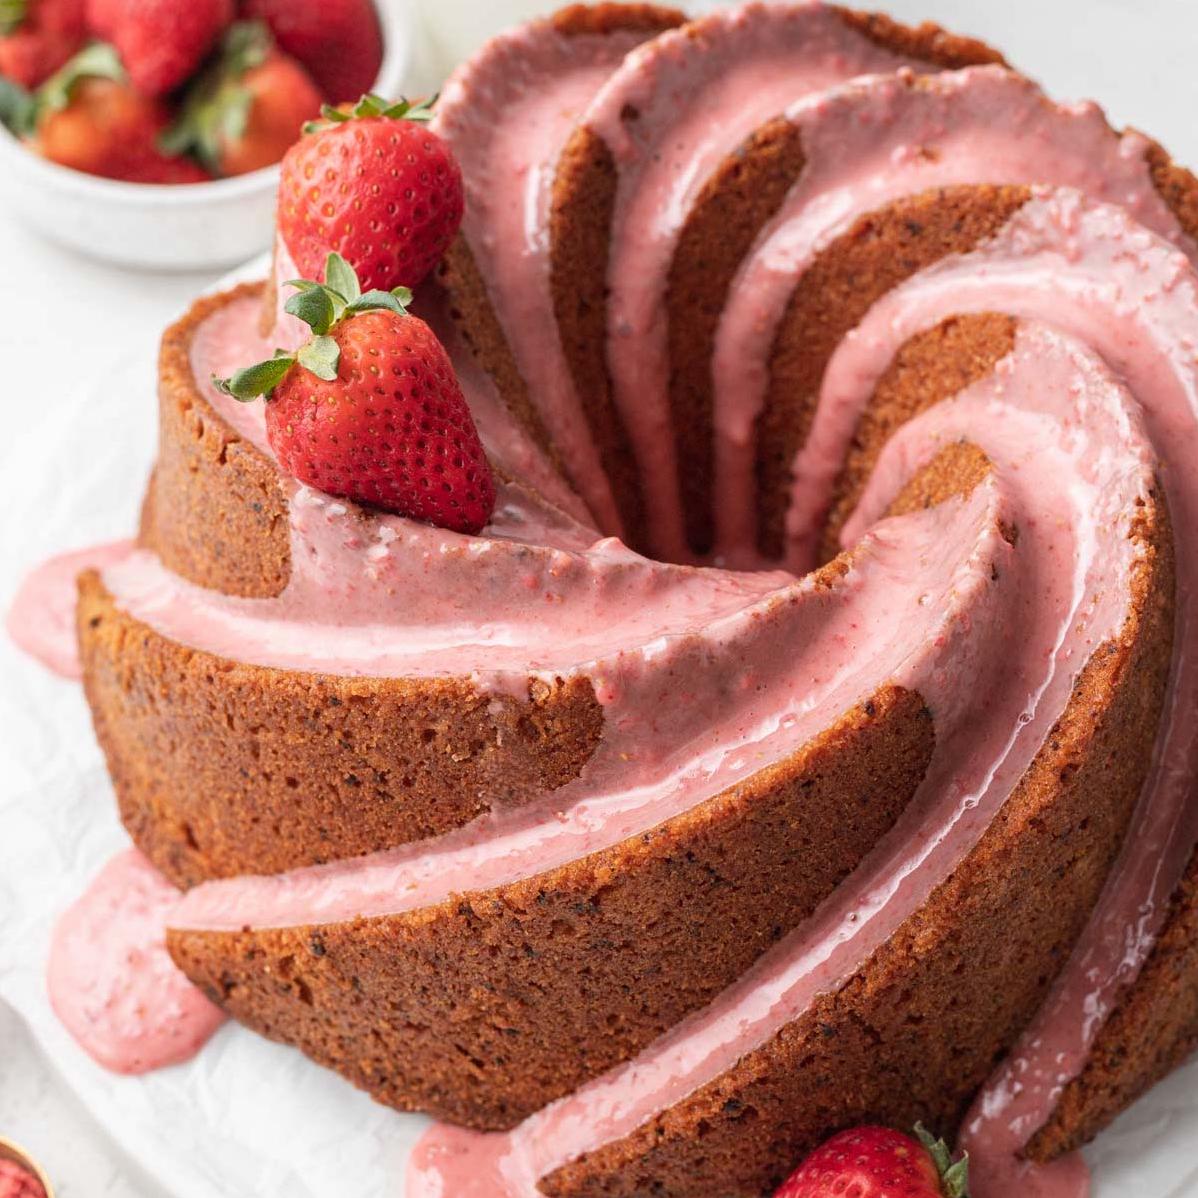  Strawberry season is in full swing with this cake!